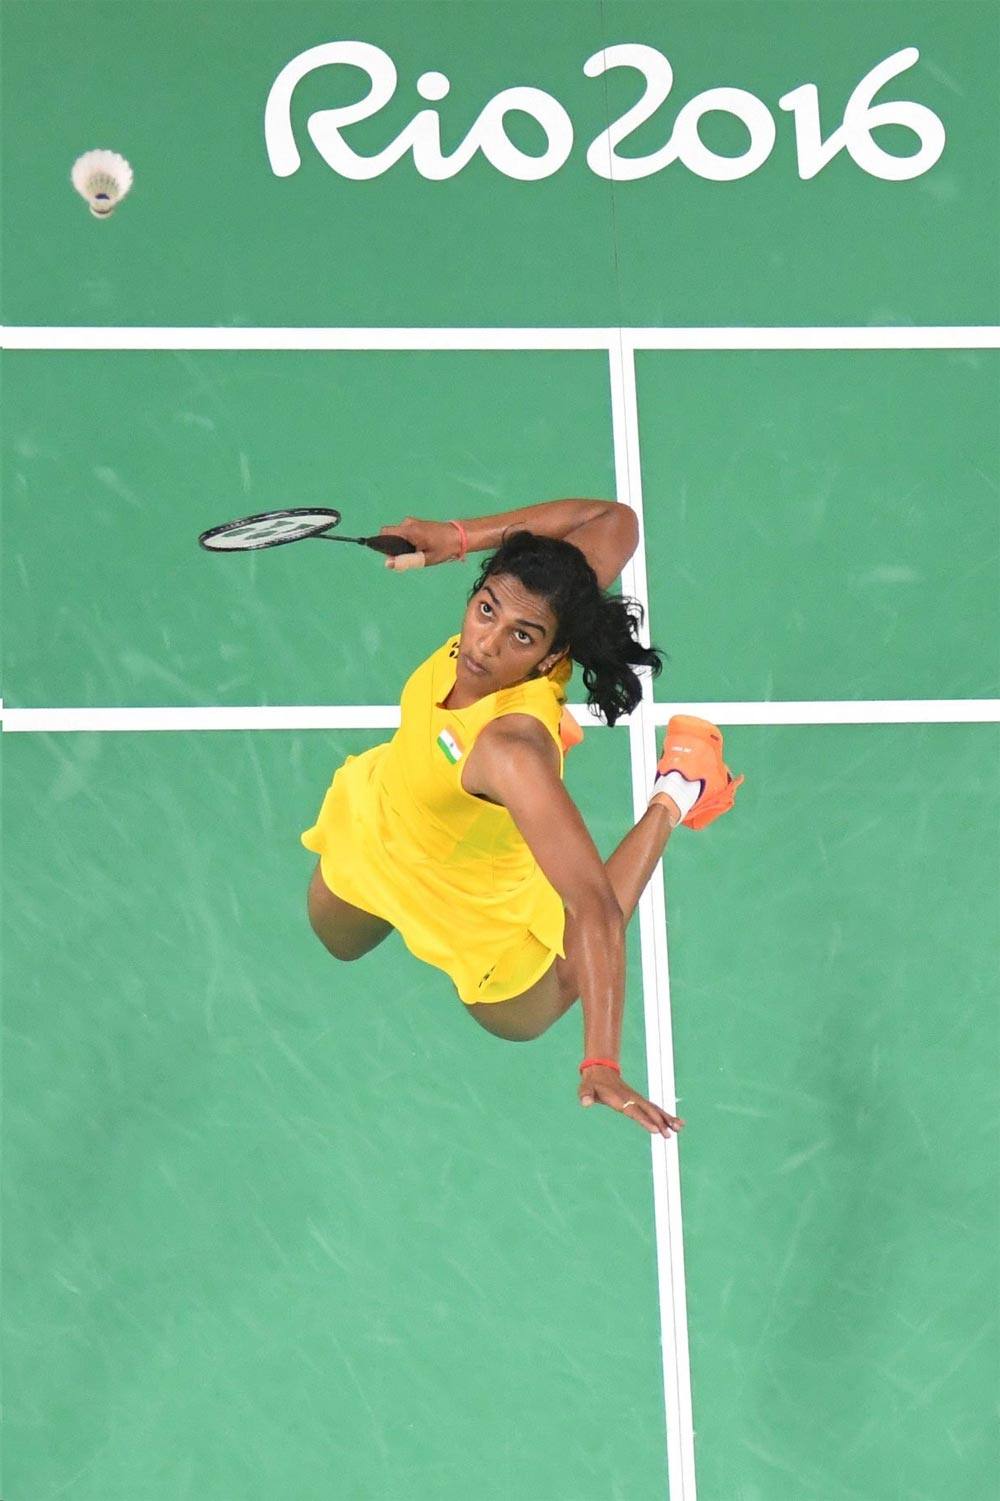 Badminton Ace P.V.Sindhu HD Photo is too hot to handle. Yup